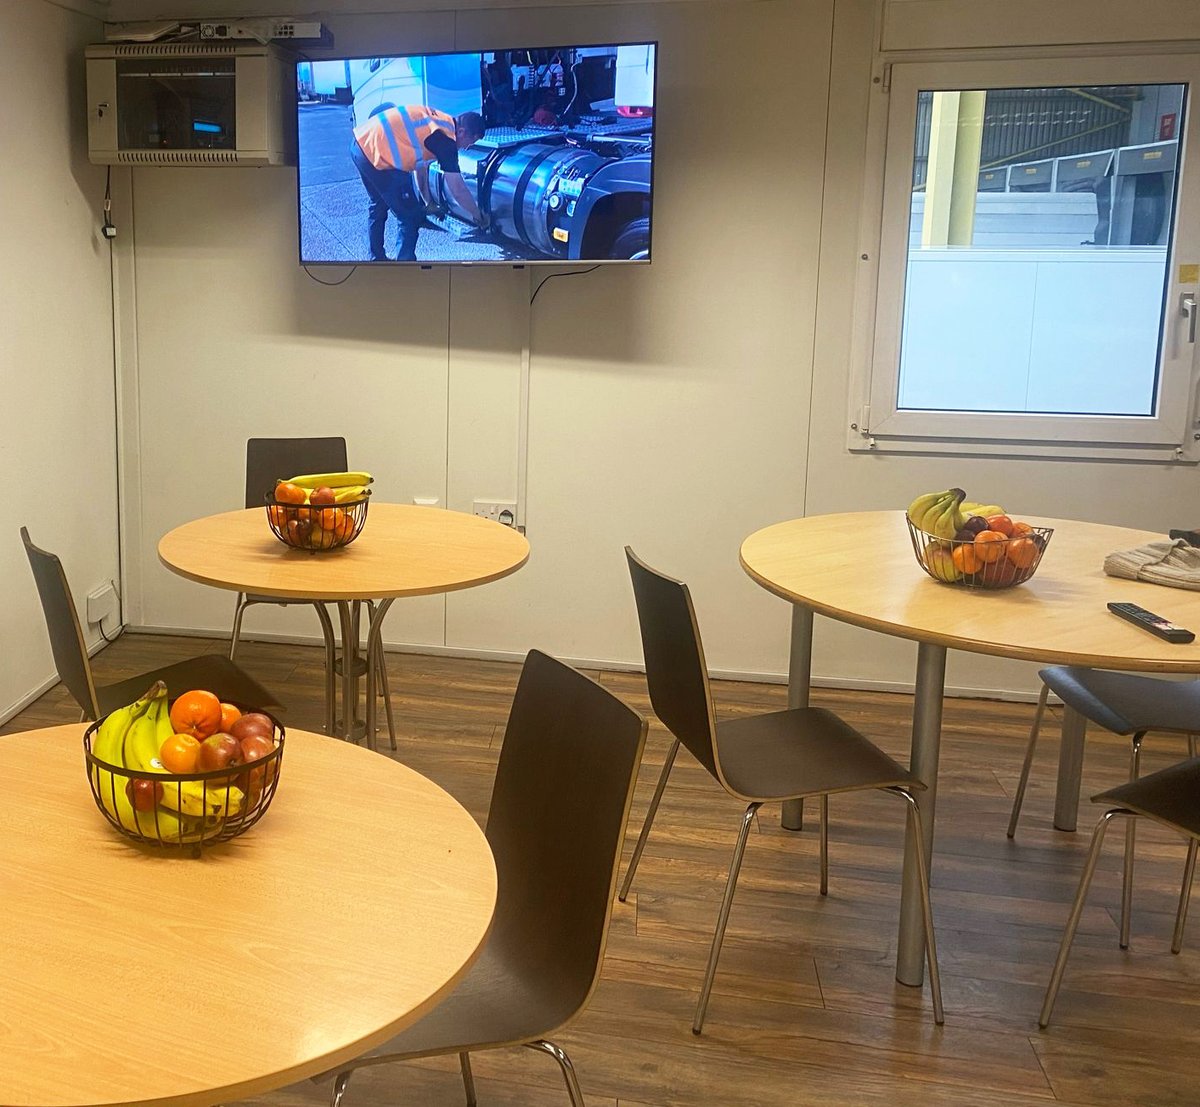 We make our rest areas as welcoming as possible and with many facilities; microwaves, toasters and snacks/drinks machines. Coffee and tea are free, as is the fresh fruit. #homecomforts #workplace #canteen #facilities #community #buffaload #logistics #hgv #truckers